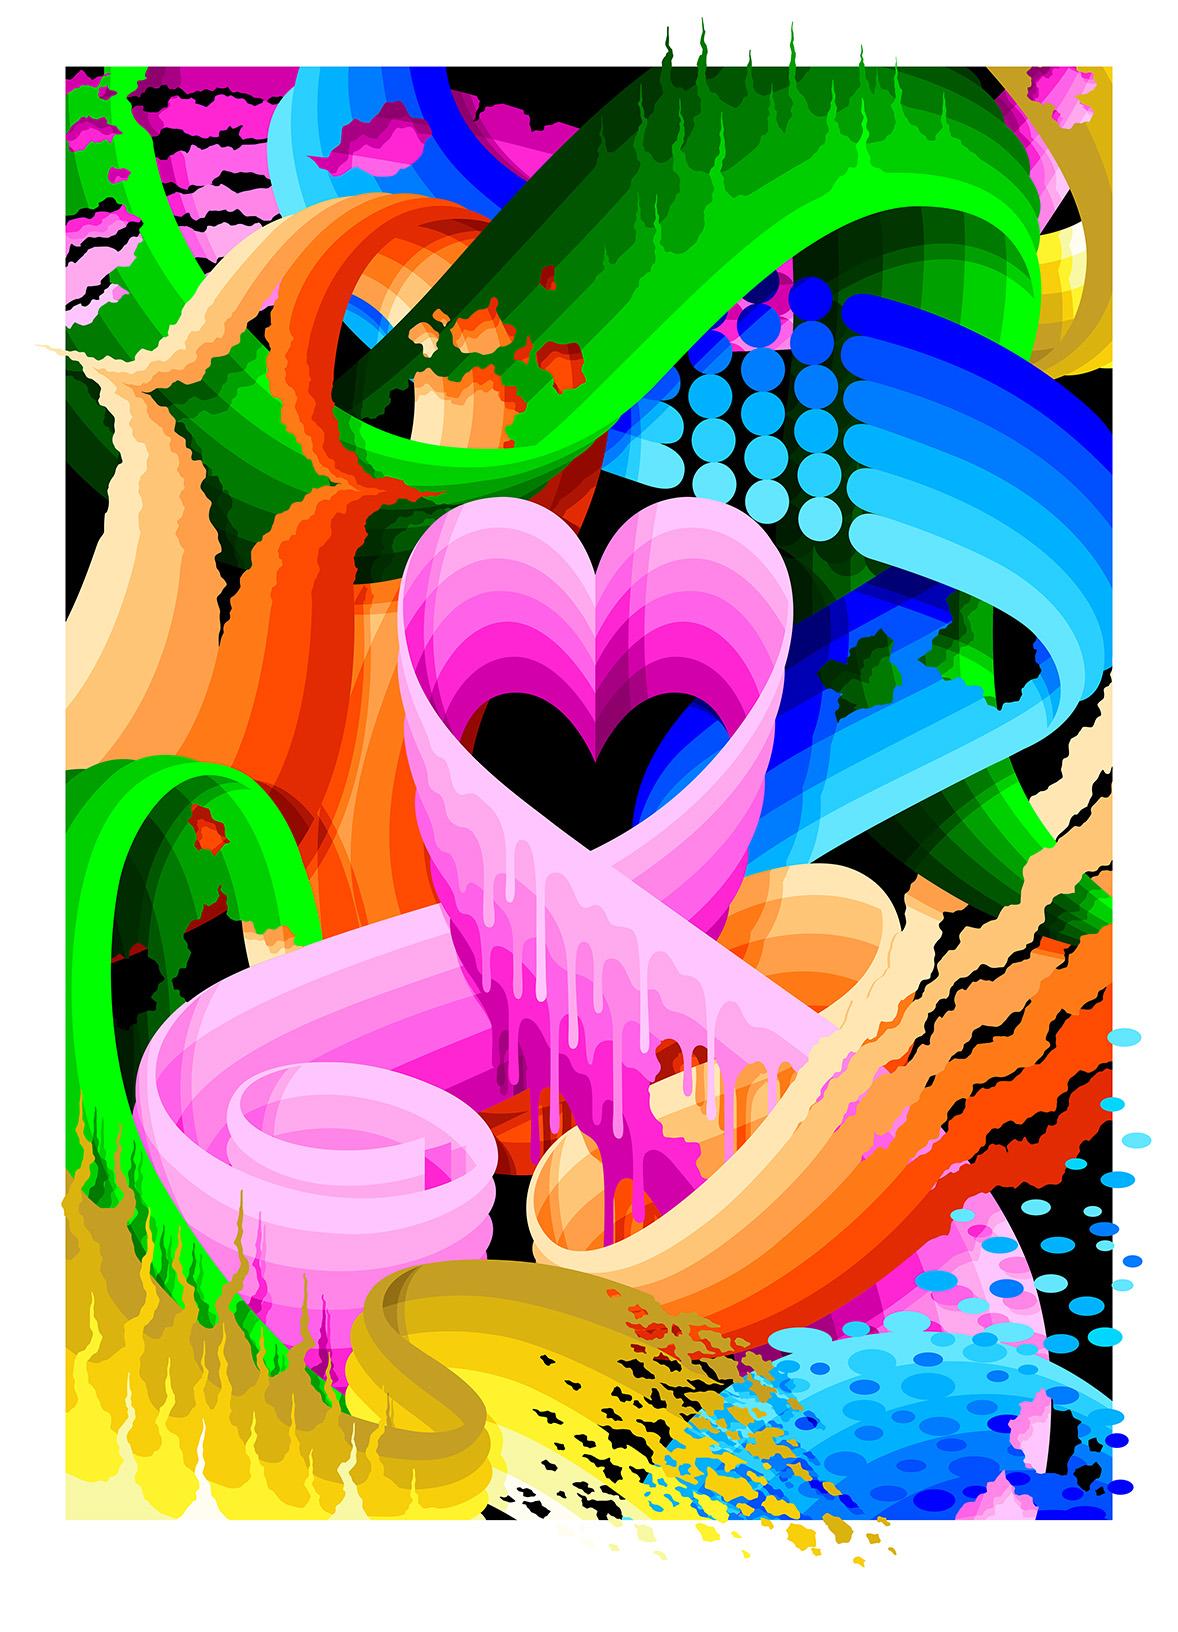 "Love Wins" by Ricky Watts is a 18" x 13" Archival Pigment Print on 290gsm Moab Fine Art Rag Paper. This work is signed, numbered and comes with a Certificate of Authenticity from Ricky Watts and 1xRUN. "Love Wins" does not come framed; please